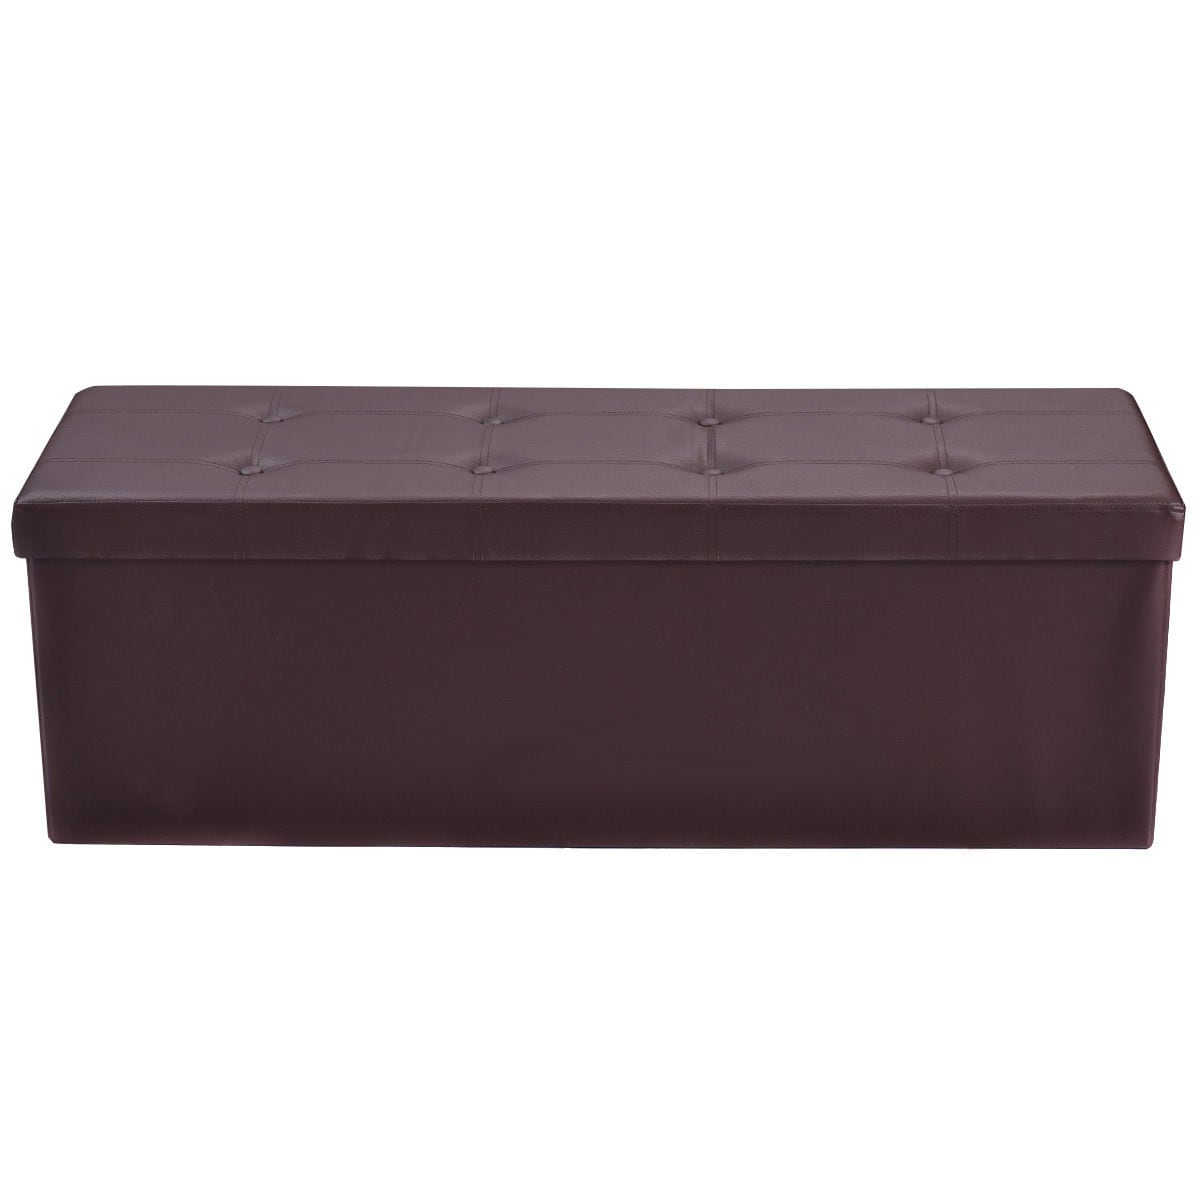 Blanket Box and ottoman Storage box Faux leather  New 